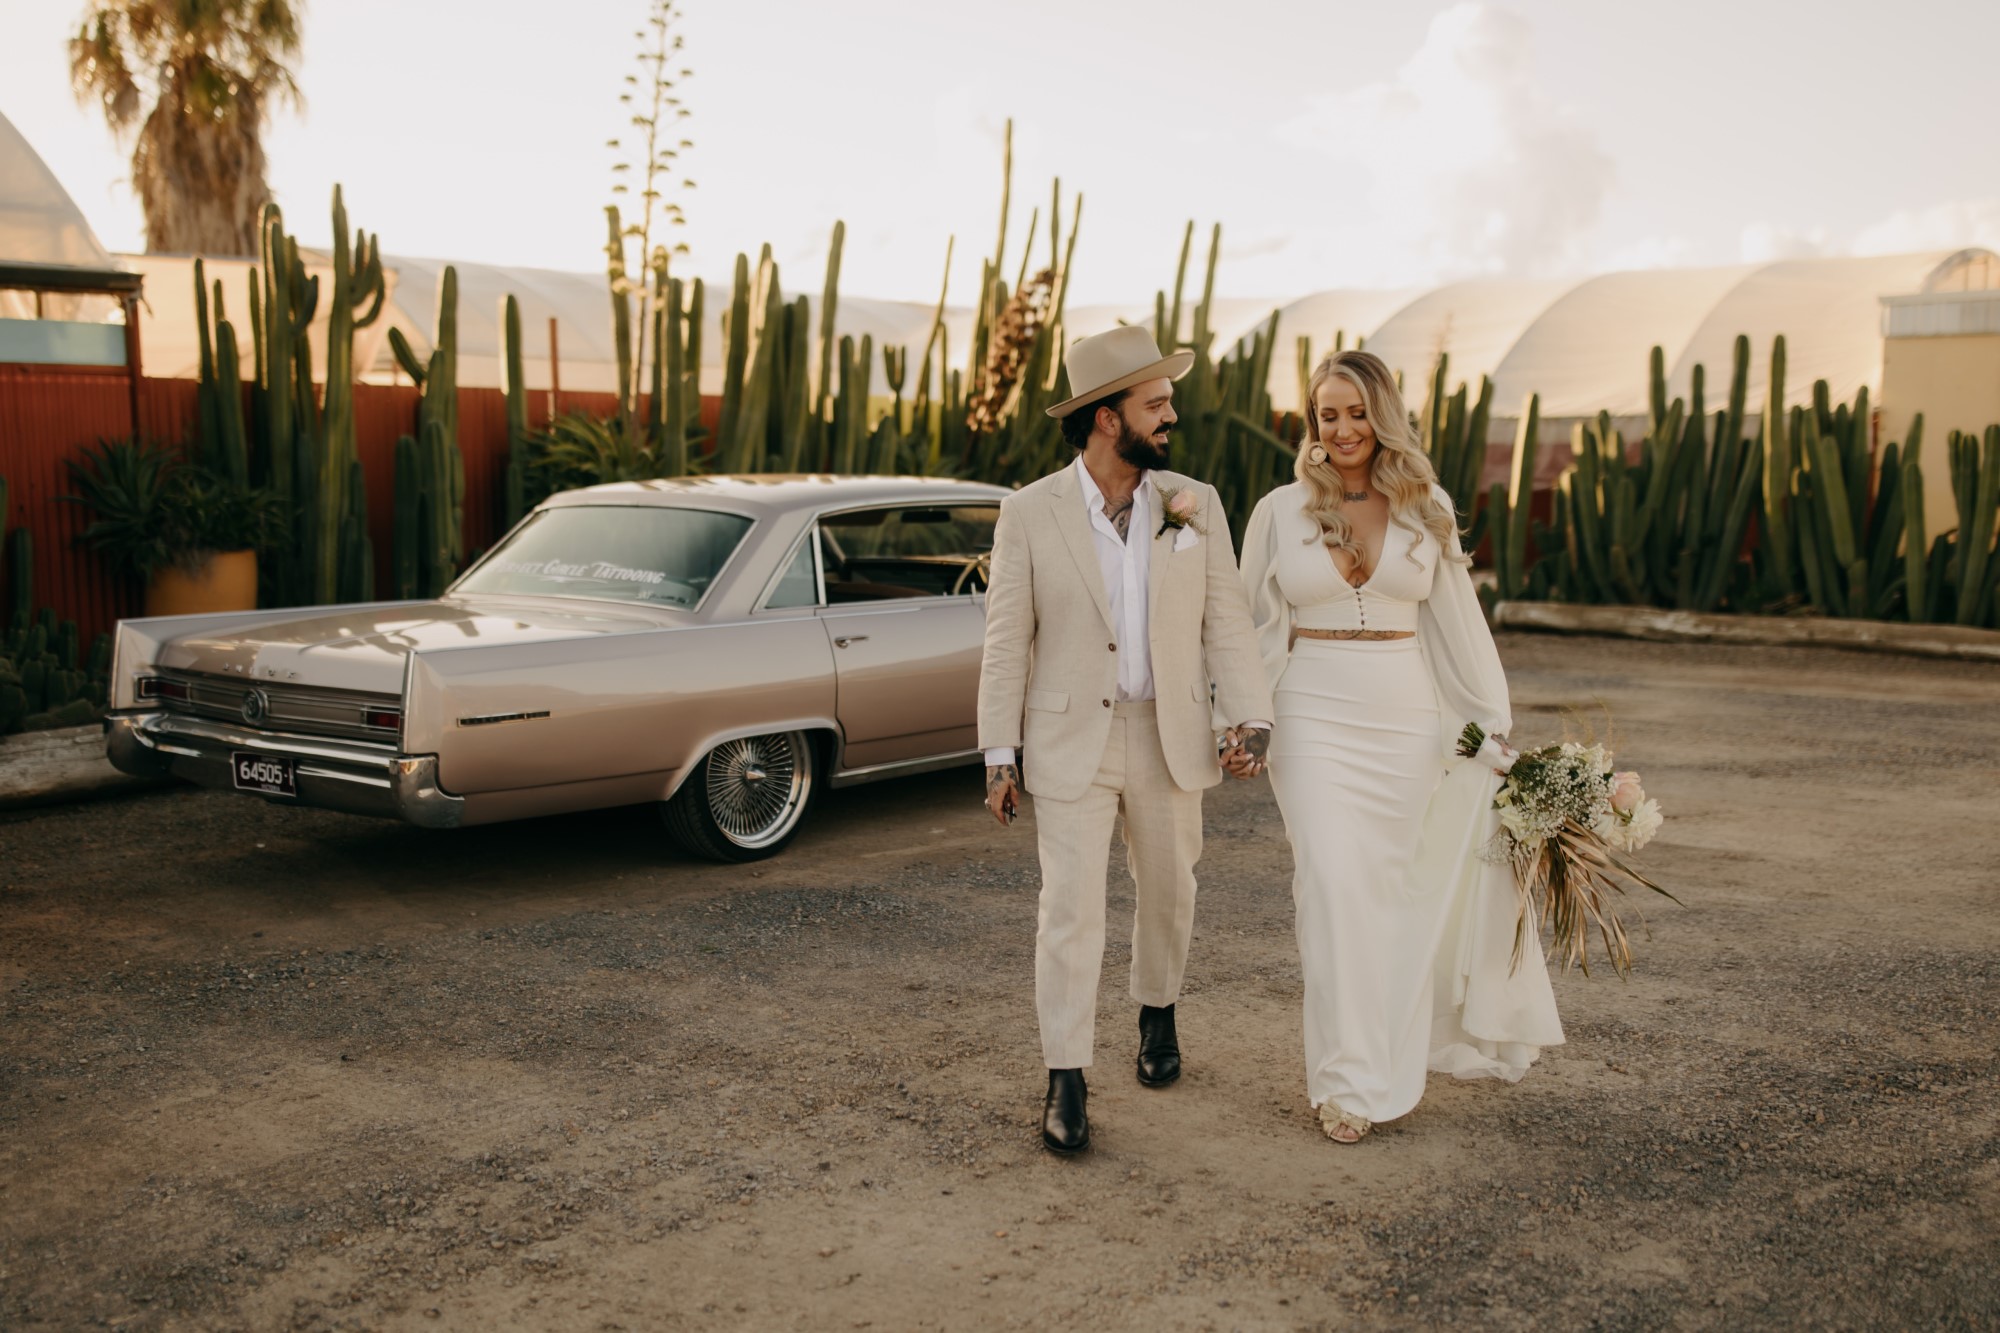 Bridal couple holding hands and walking in front of a vintage car in the desert with surrounding cacti